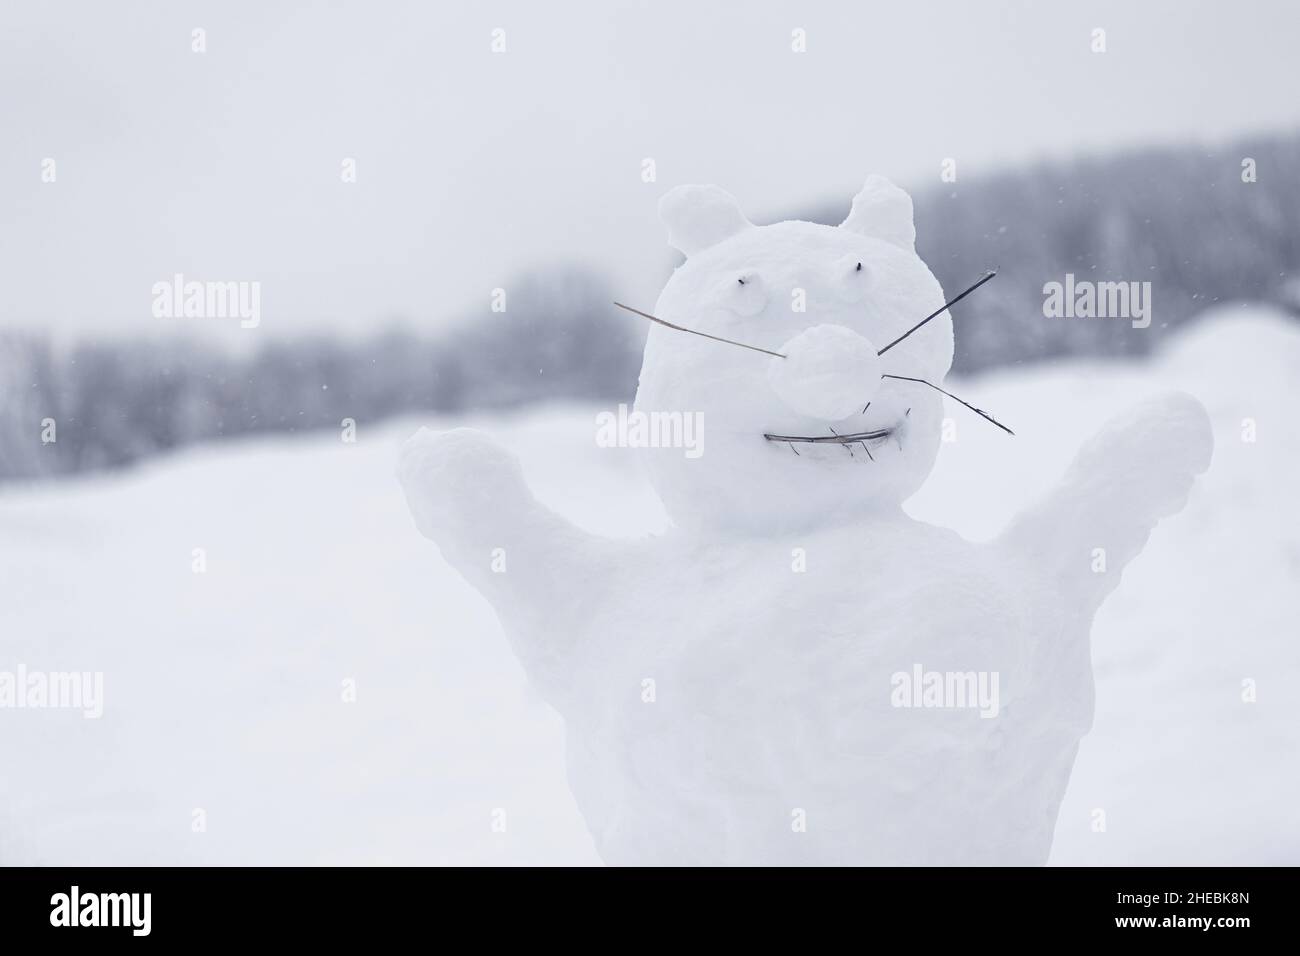 The figure of funny snowman animal in snowy field Stock Photo